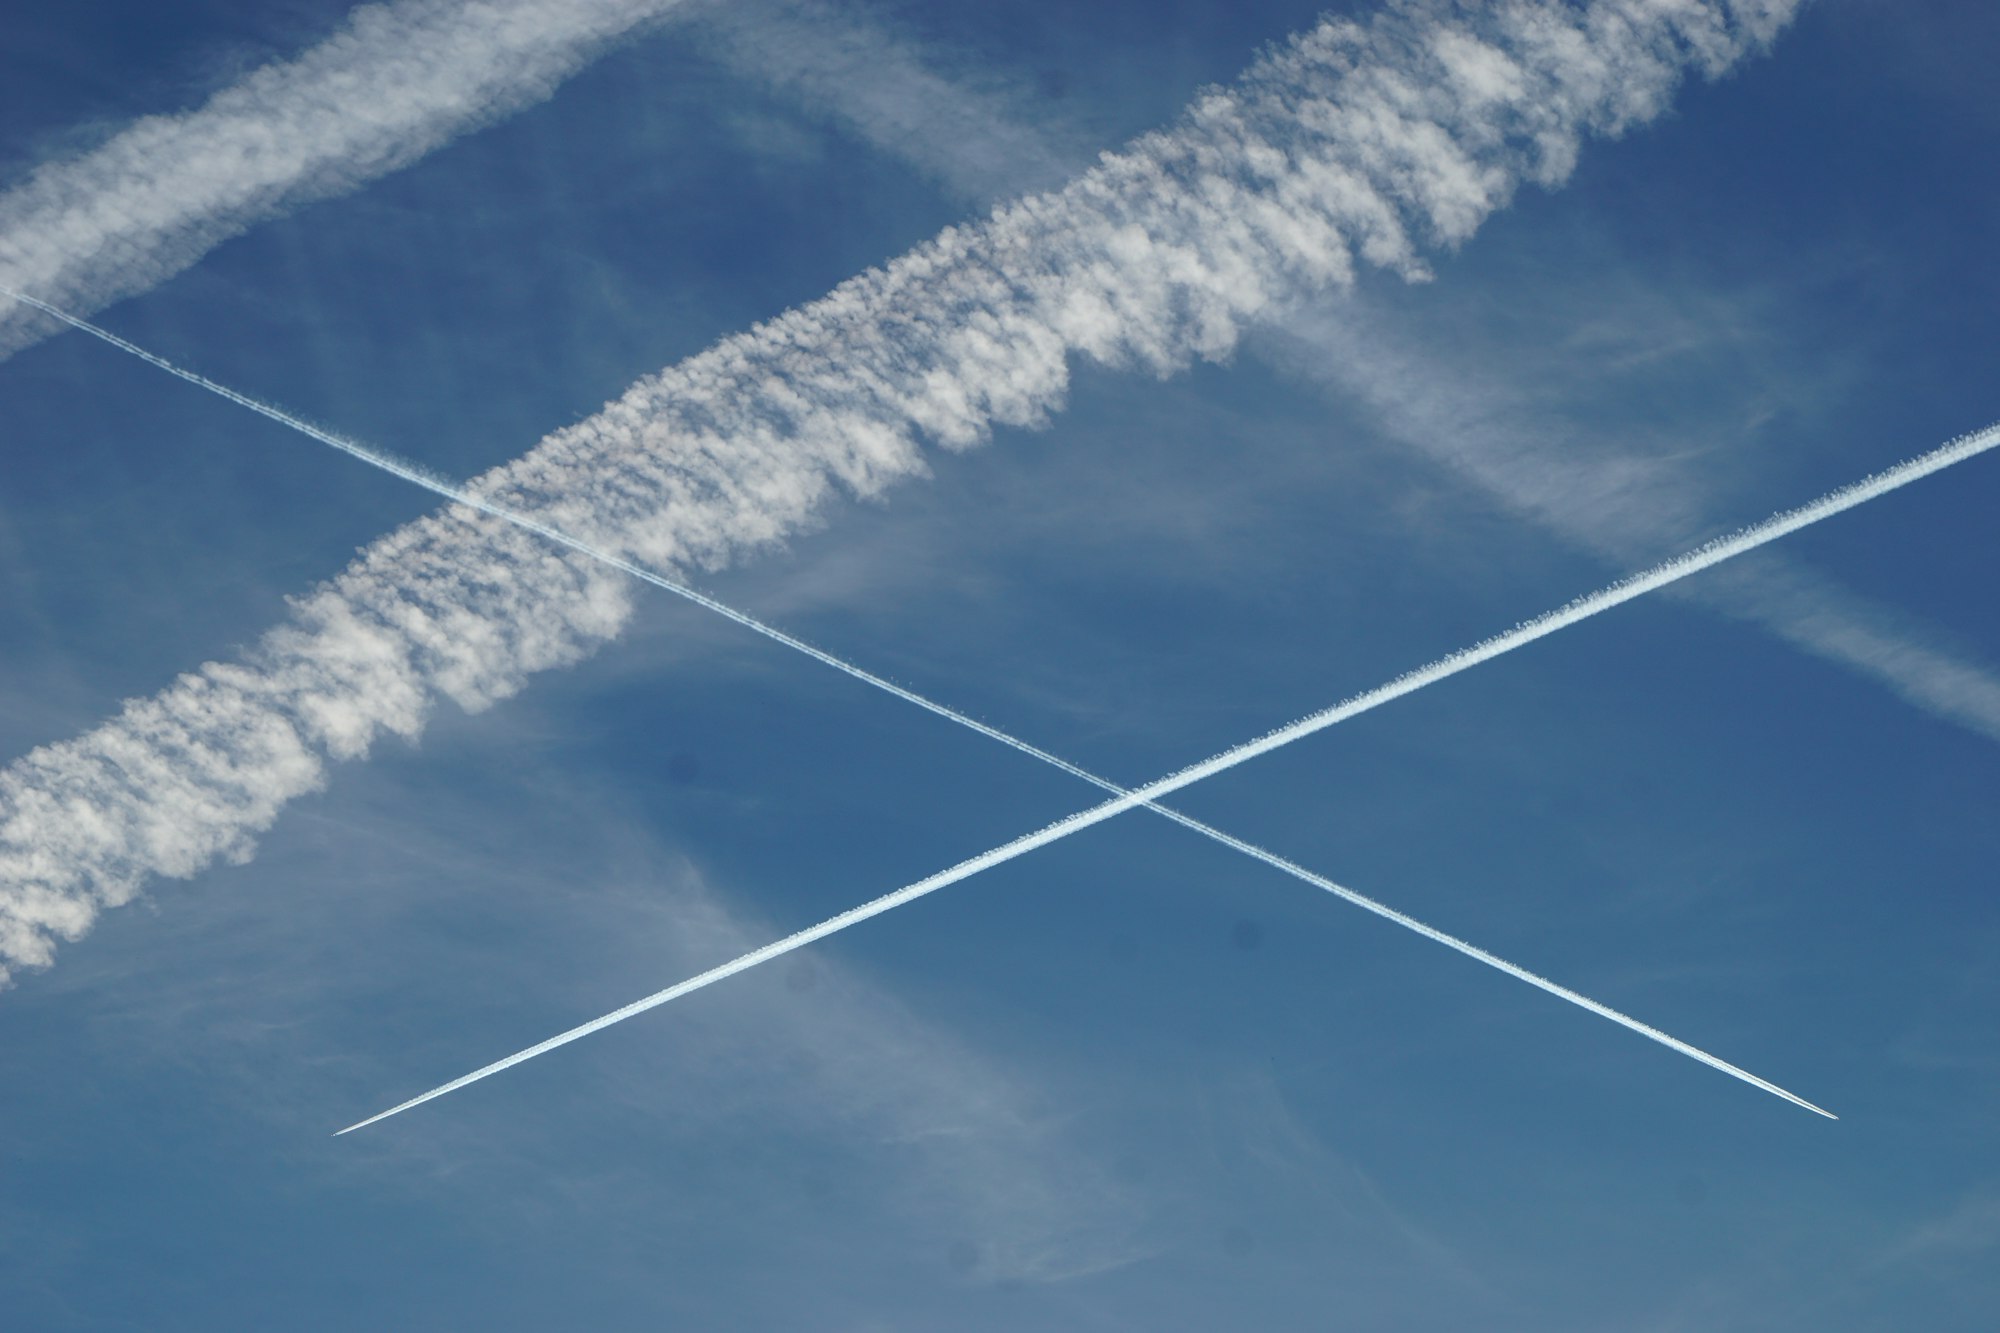 Tennessee Senate Votes to Ban "Chemtrails," Sparking Debate Over Science and Conspiracy